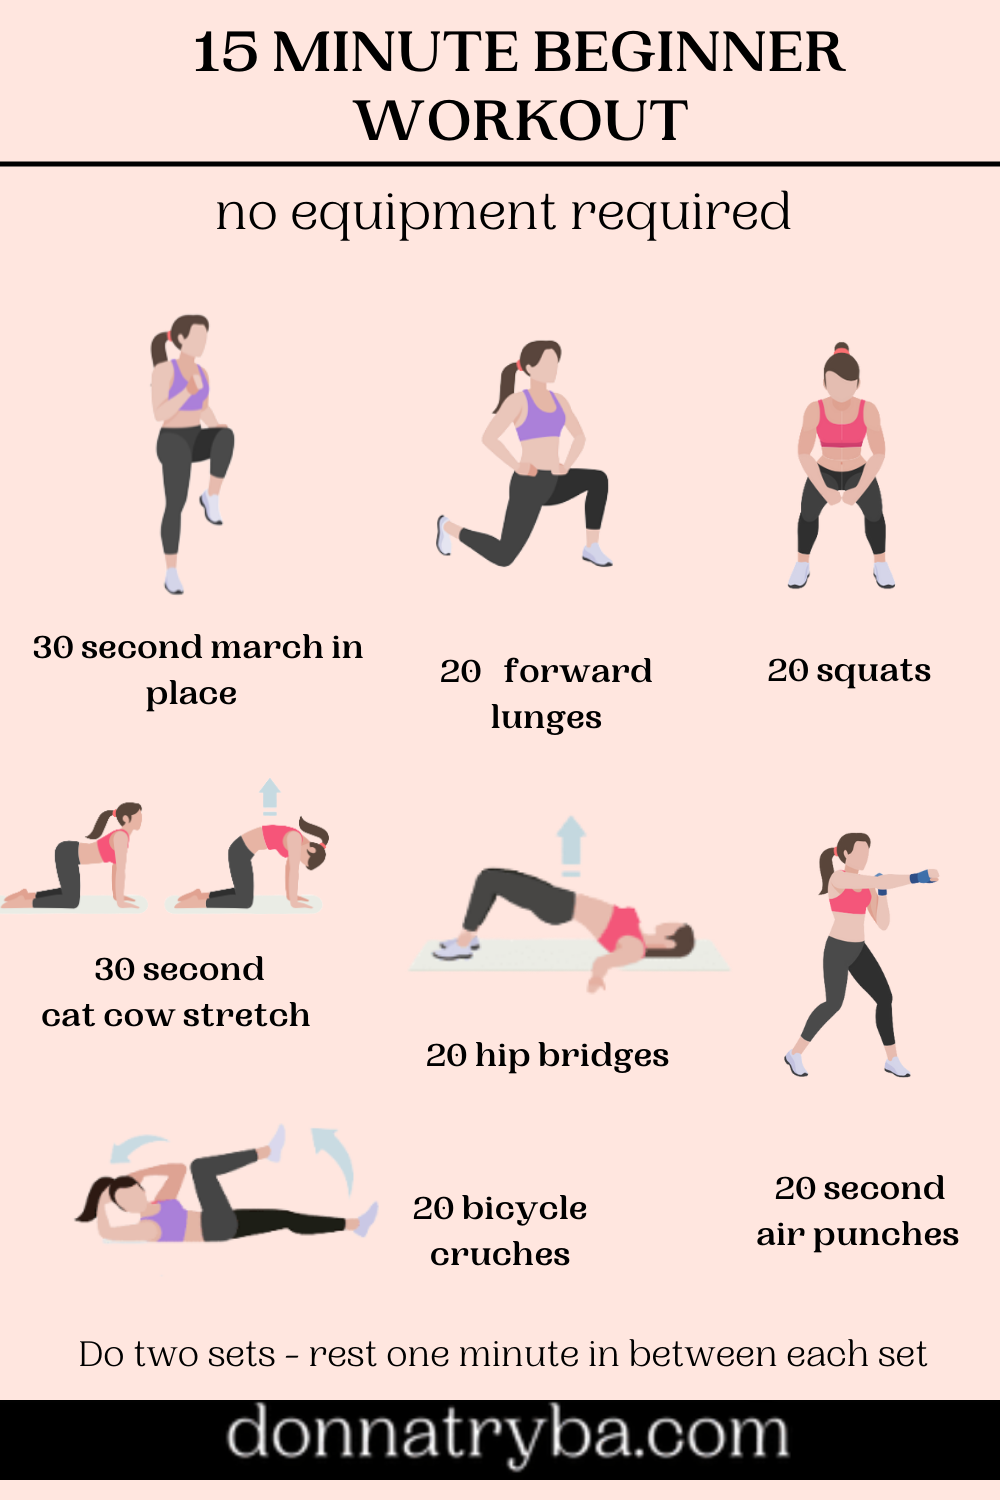 5 Simple Workout Routines You Can Do Anywhere  Workout routines for  beginners, Simple workout routine, Beginner workout